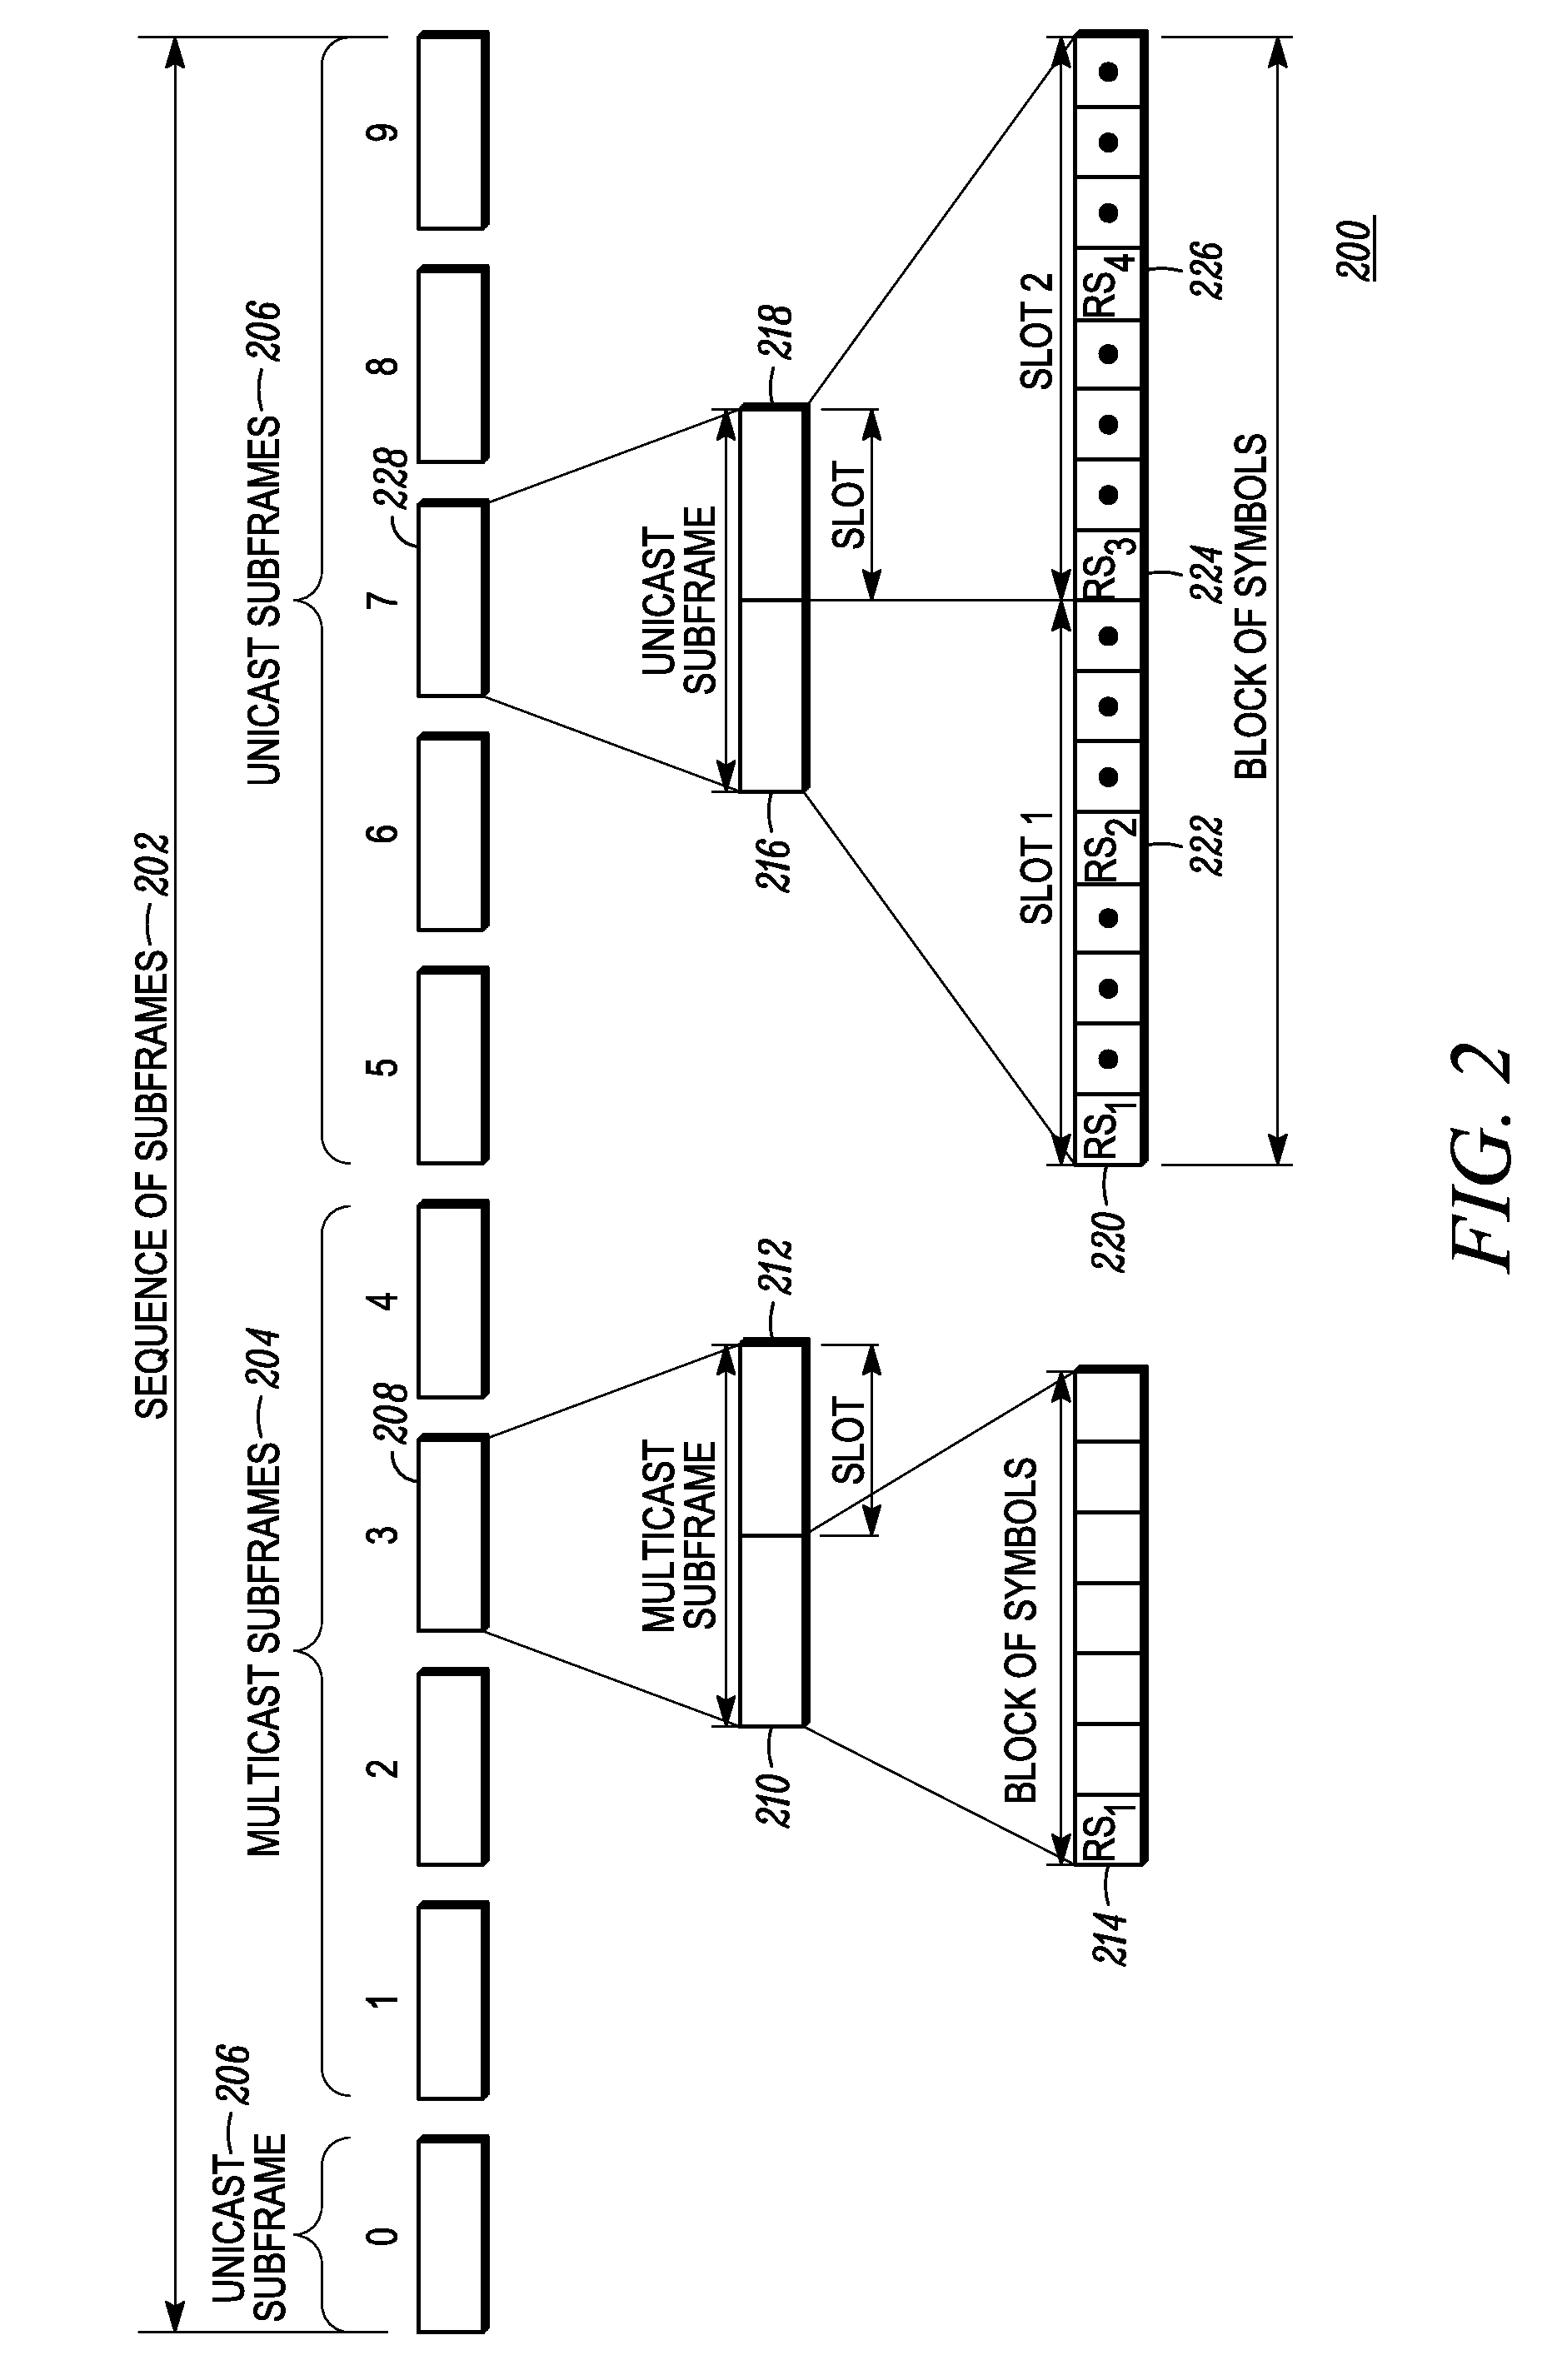 Method and apparatus for performing mobility measurements in a communication network